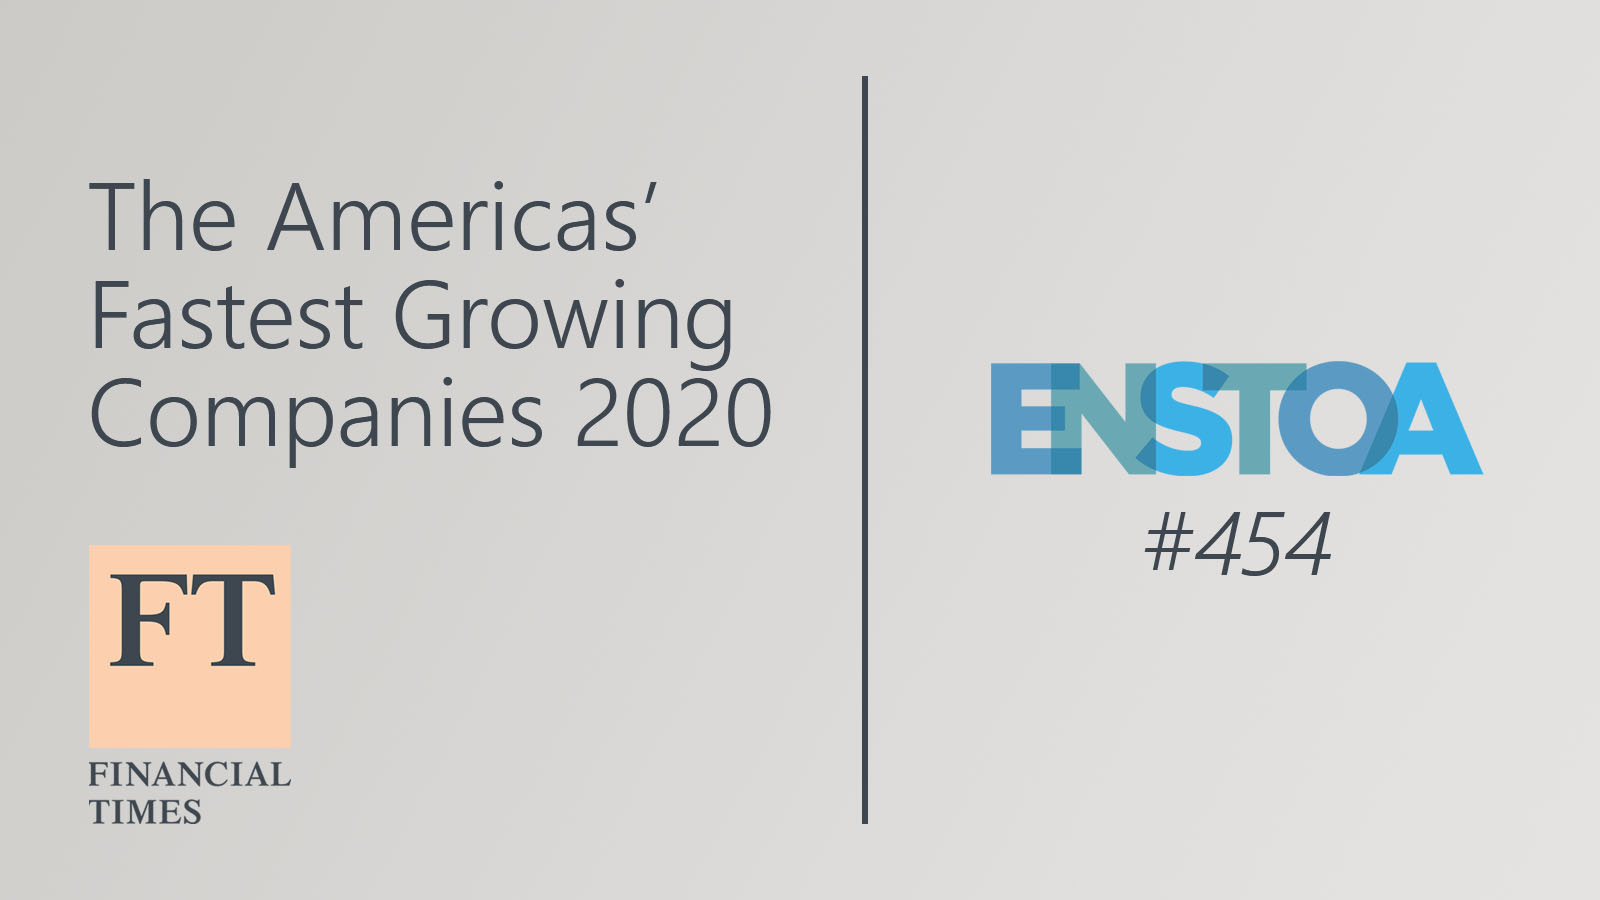 Enstoa Makes the Financial Times List for The Americas’ Fastest Growing Companies 2020